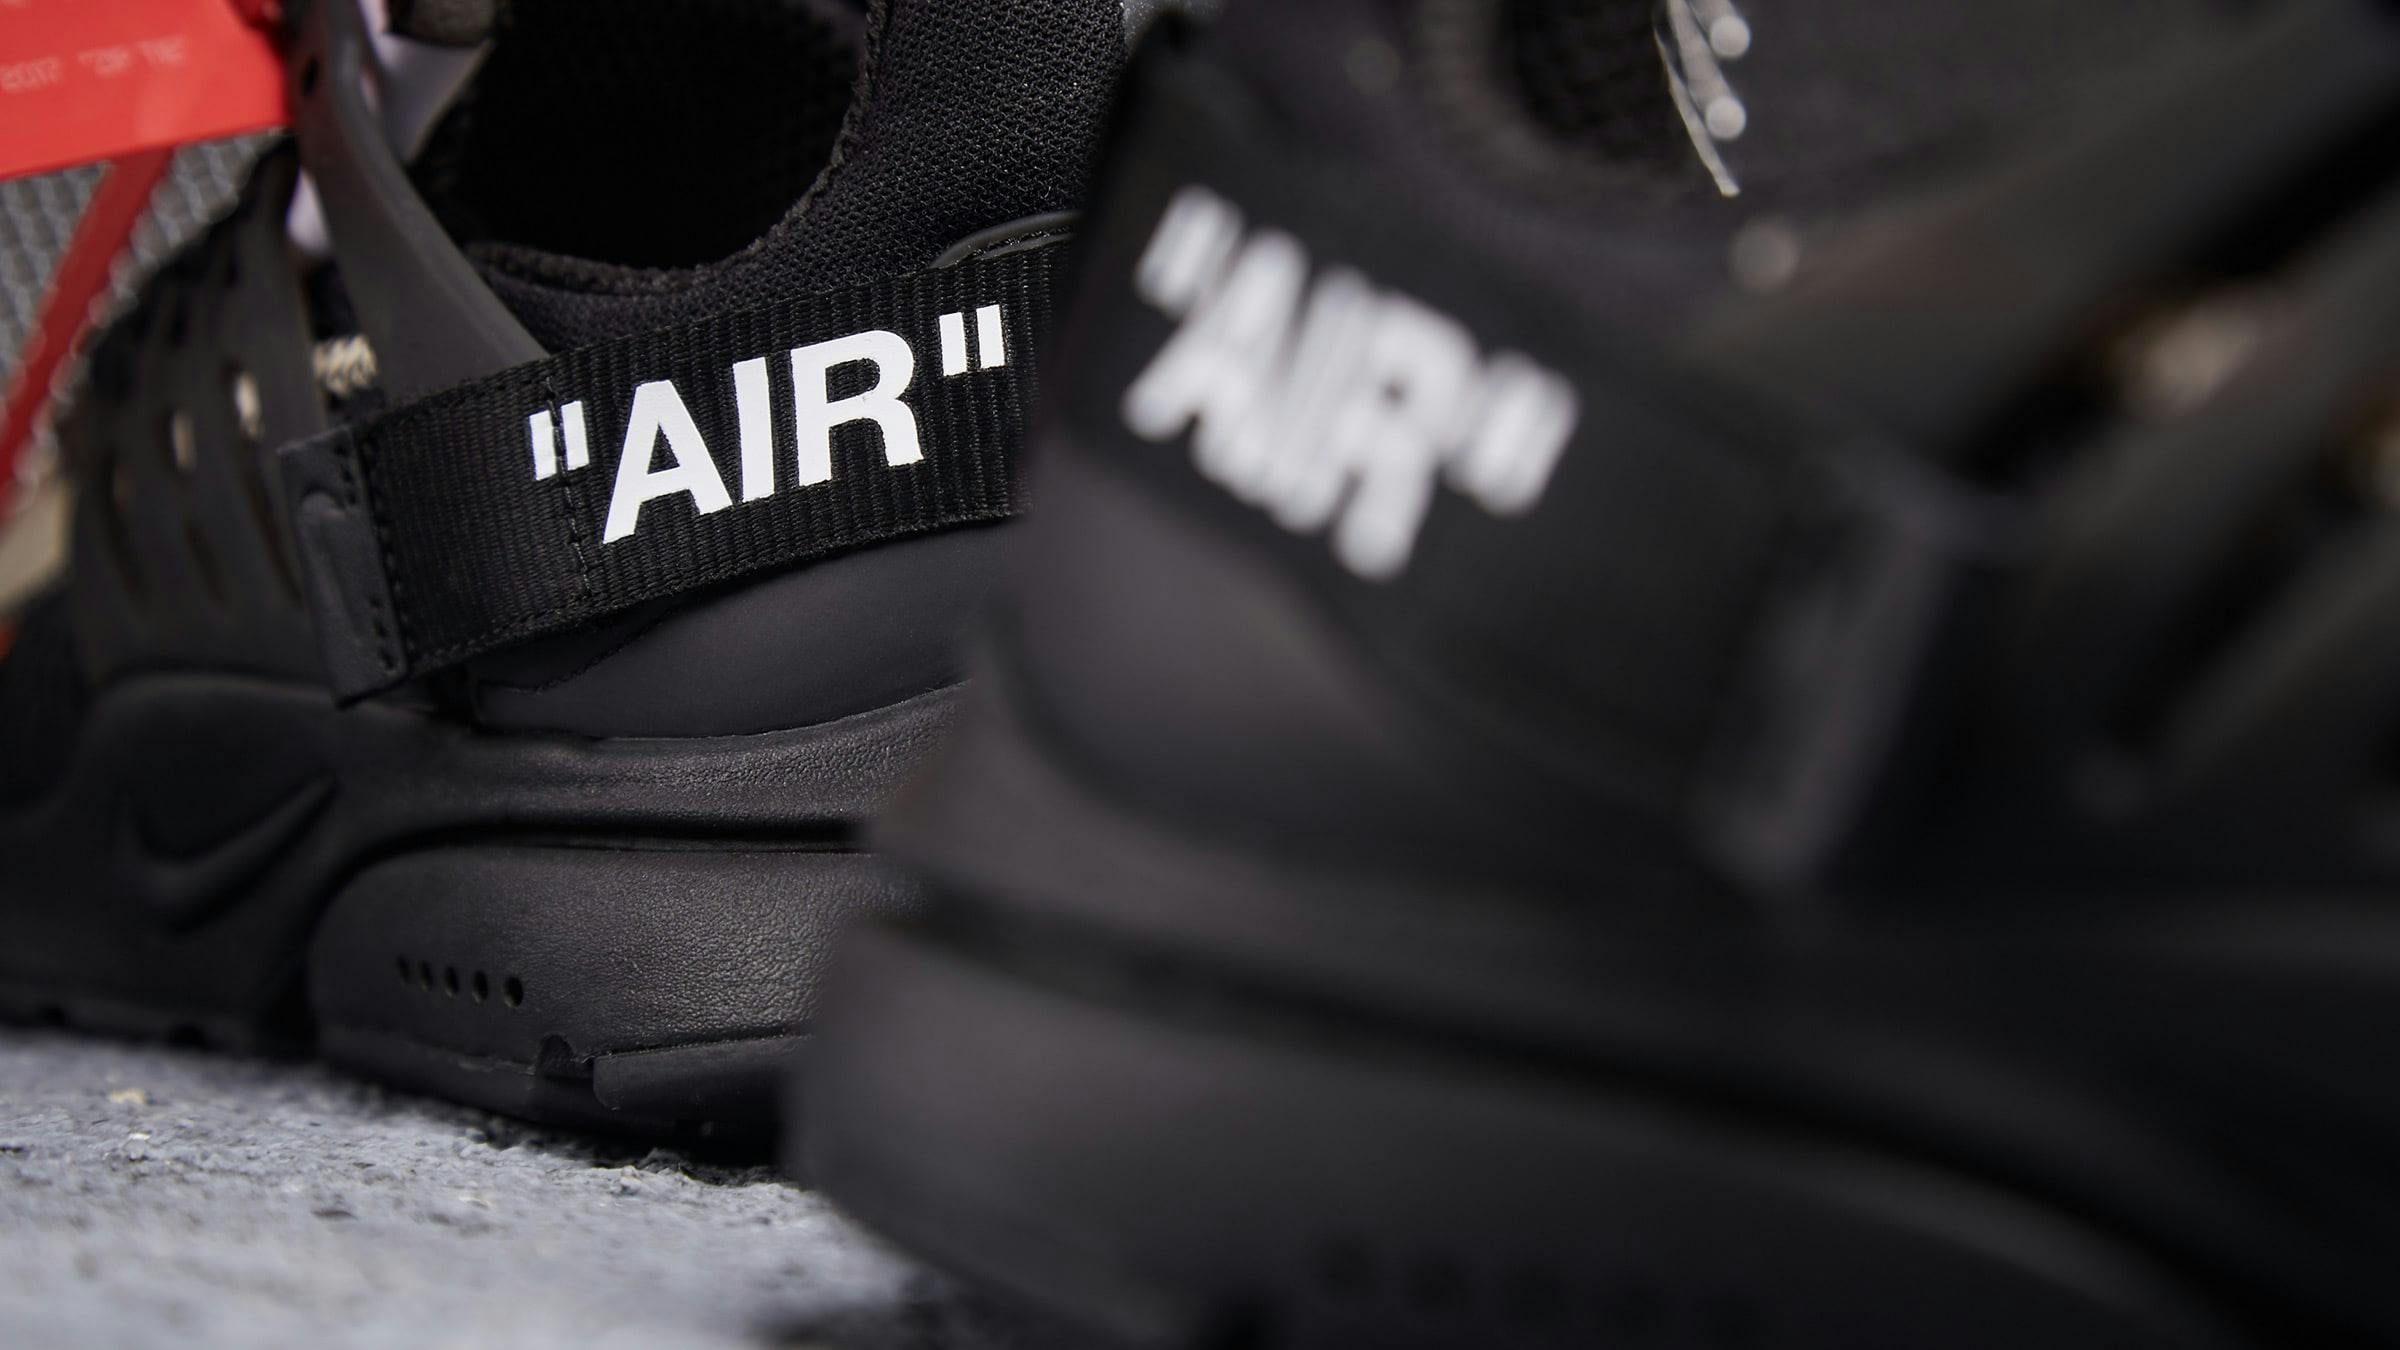 Nike x Virgil Abloh The Ten: Air 'Black' - Register Now on END. Launches END.